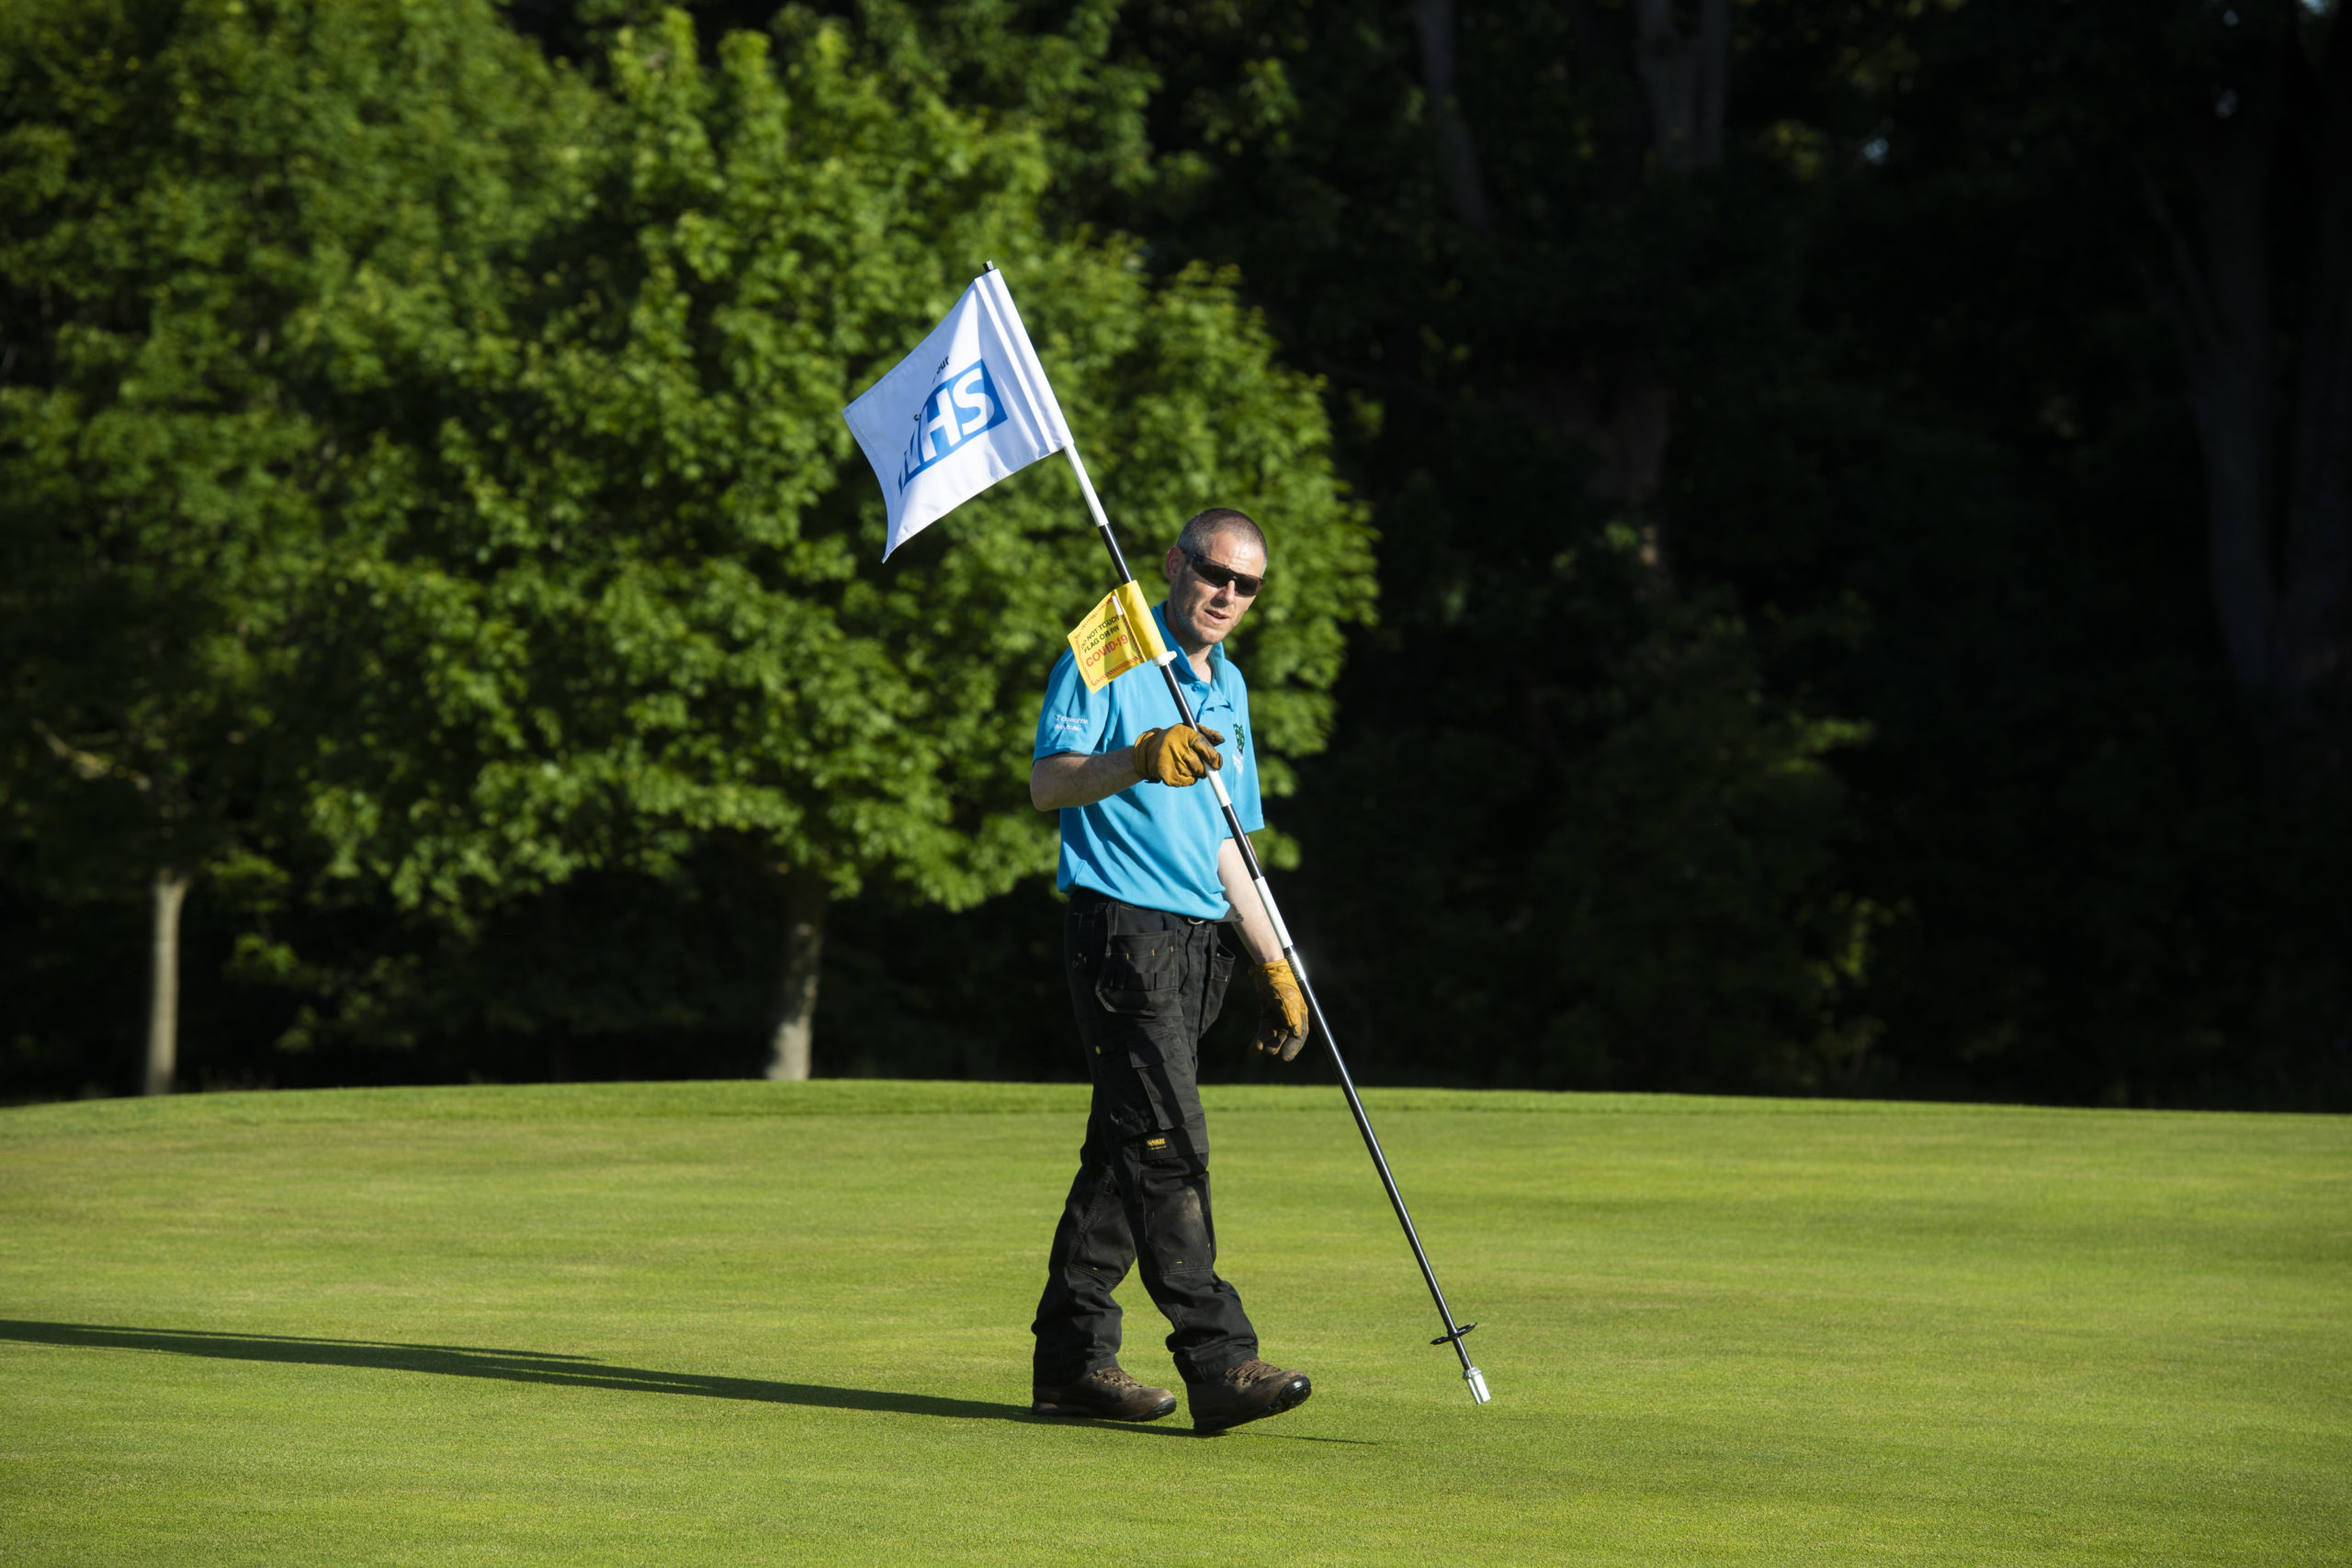 Staff at Bruntsfield Links show Covid-19 warning signs for the return of golfers. SNS Group.